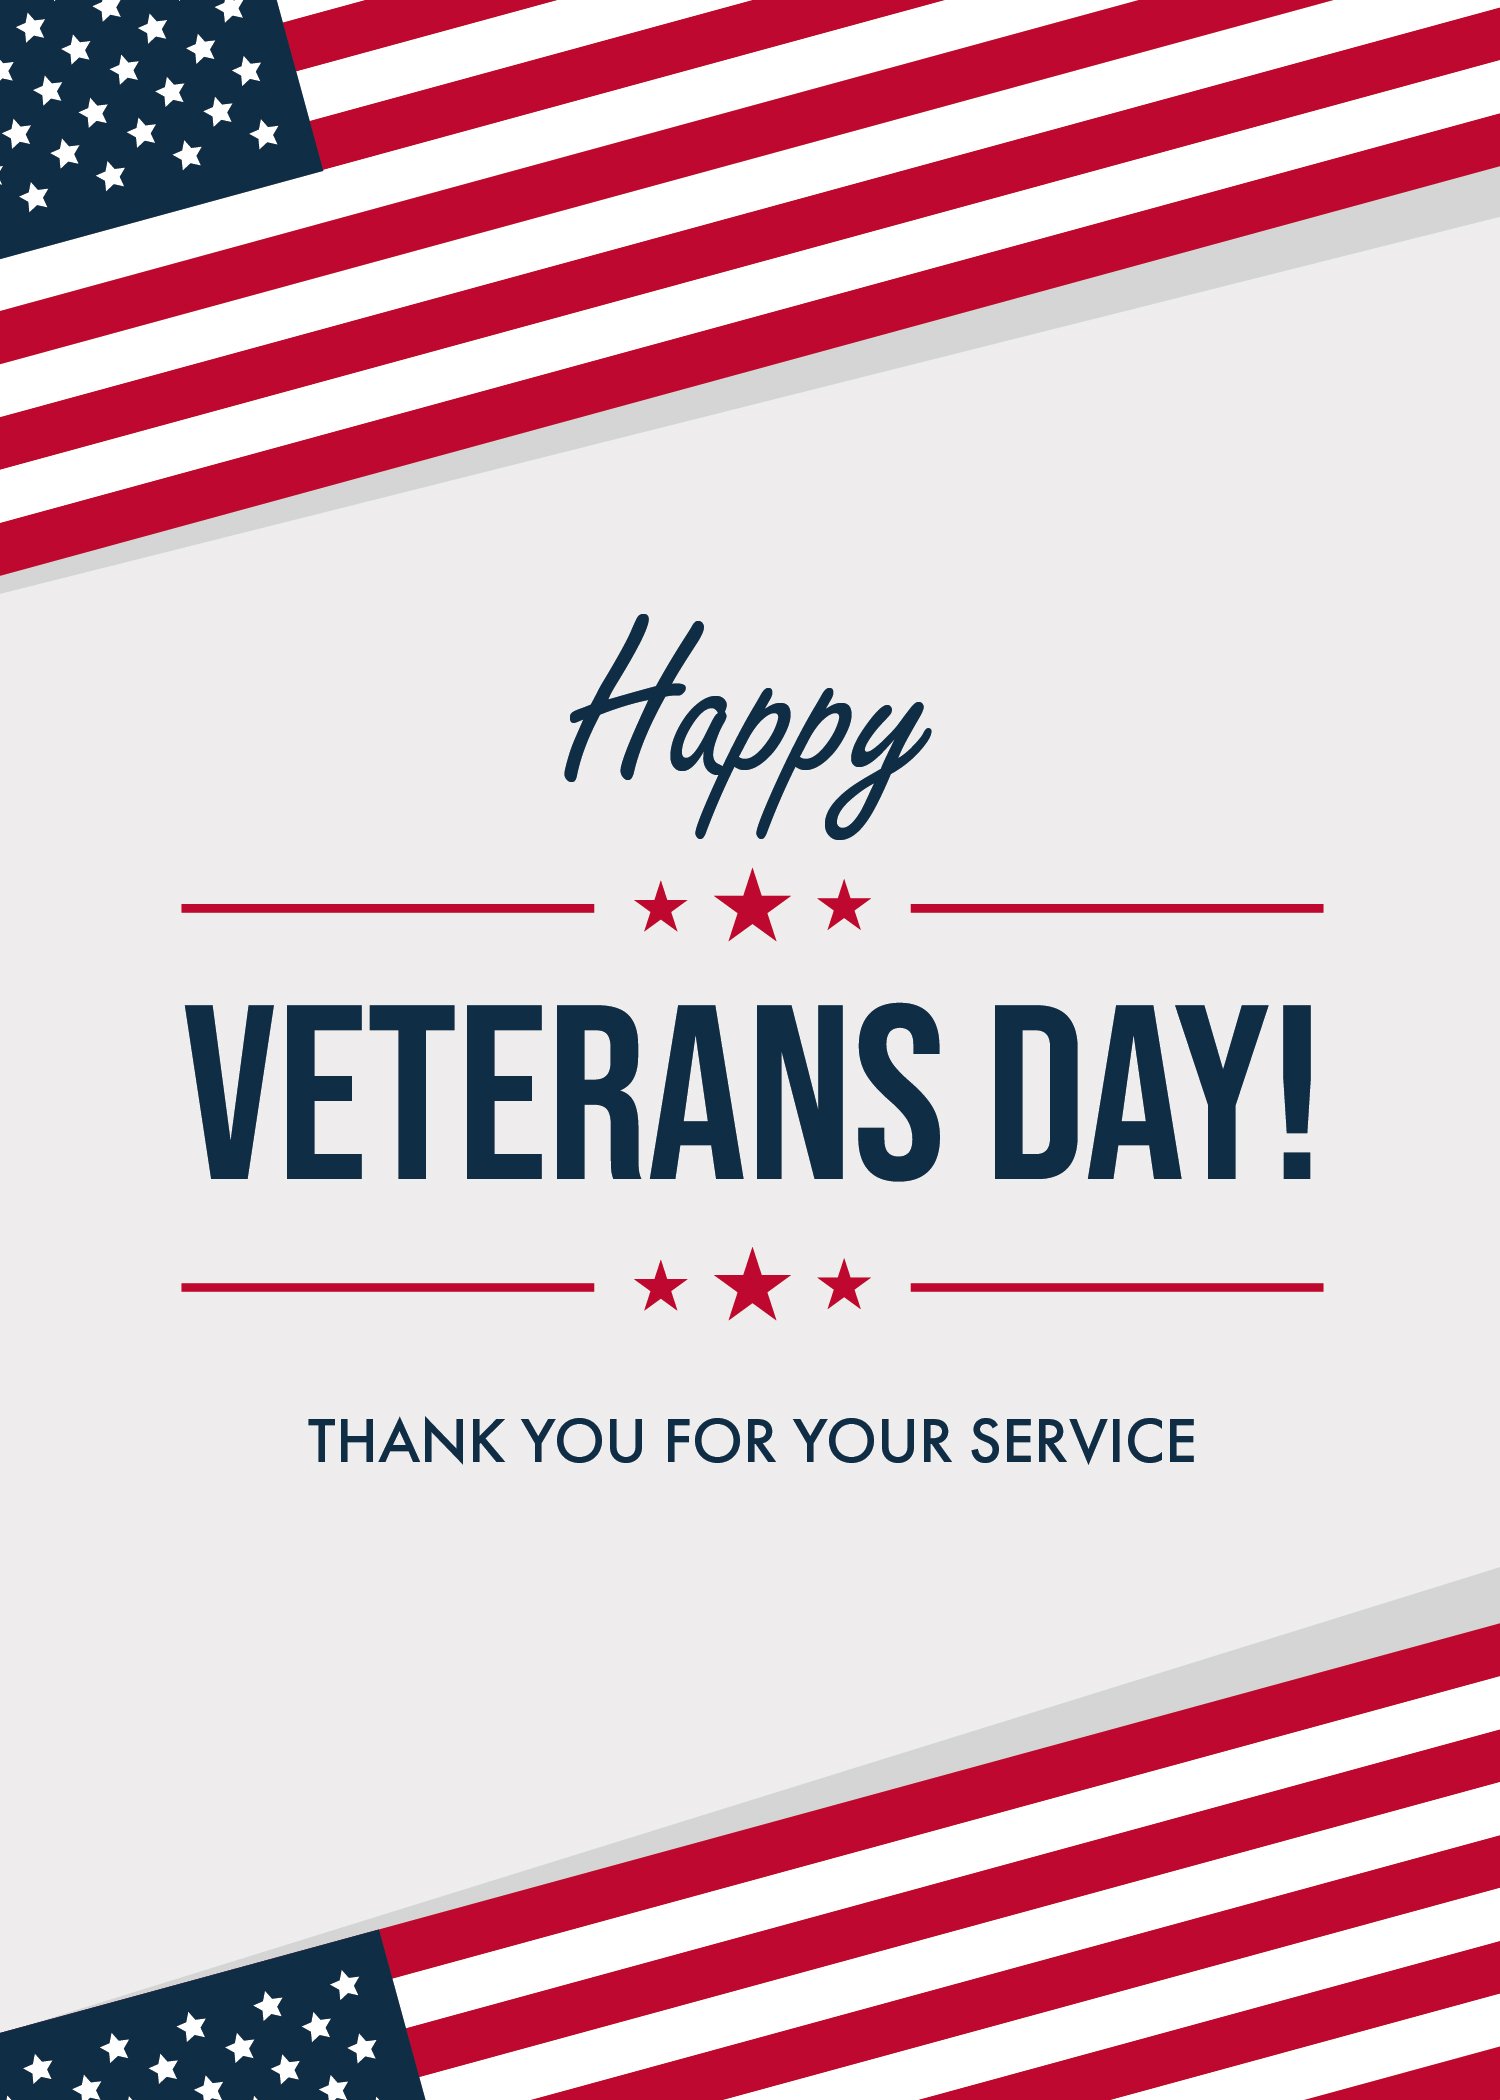 Veterans Day Invitation Template Edit Online Download Example